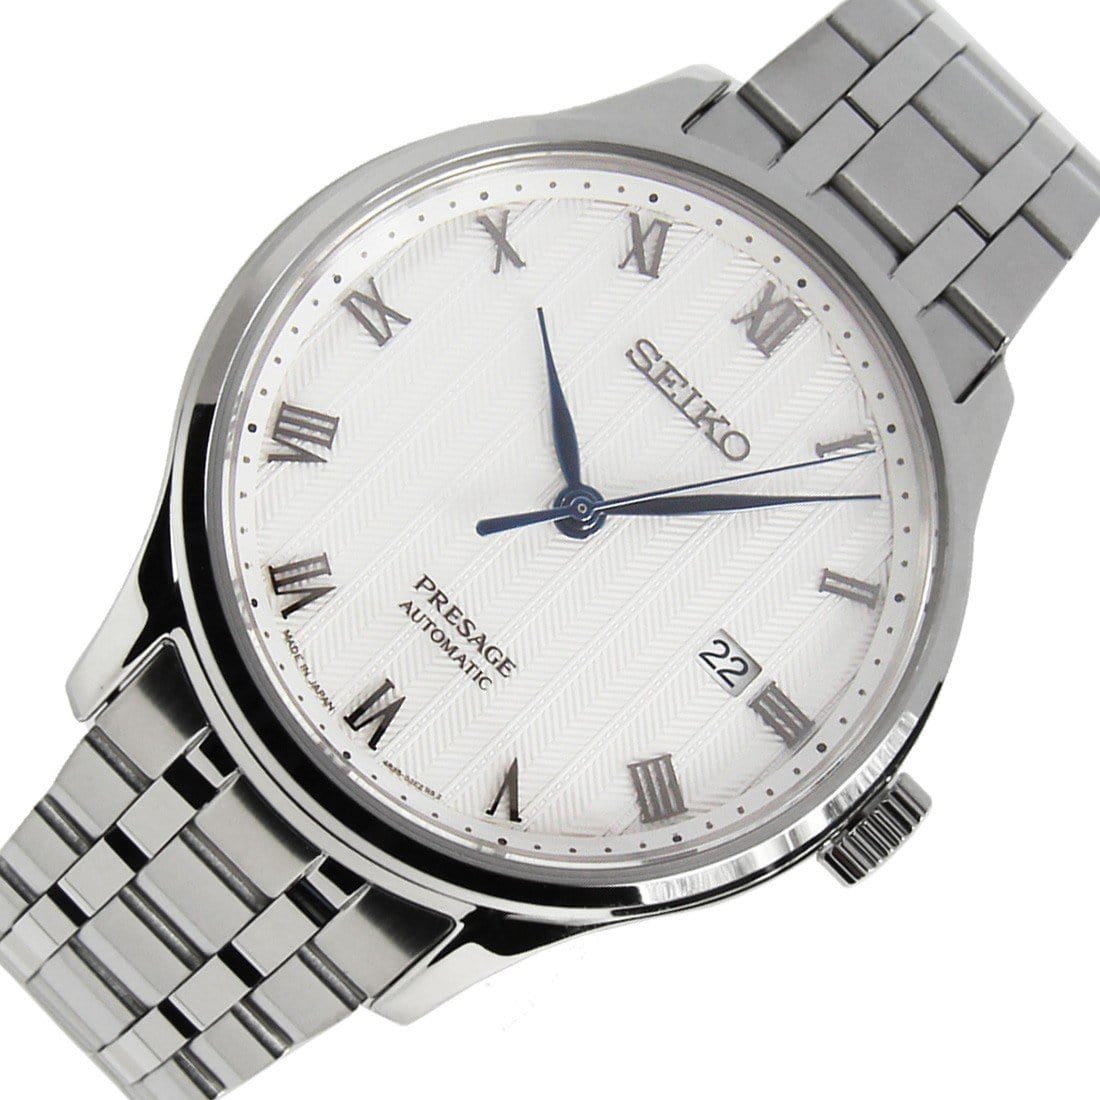 Seiko Presage Made in Japan Automatic Watch SRPC79J1 SRPC79